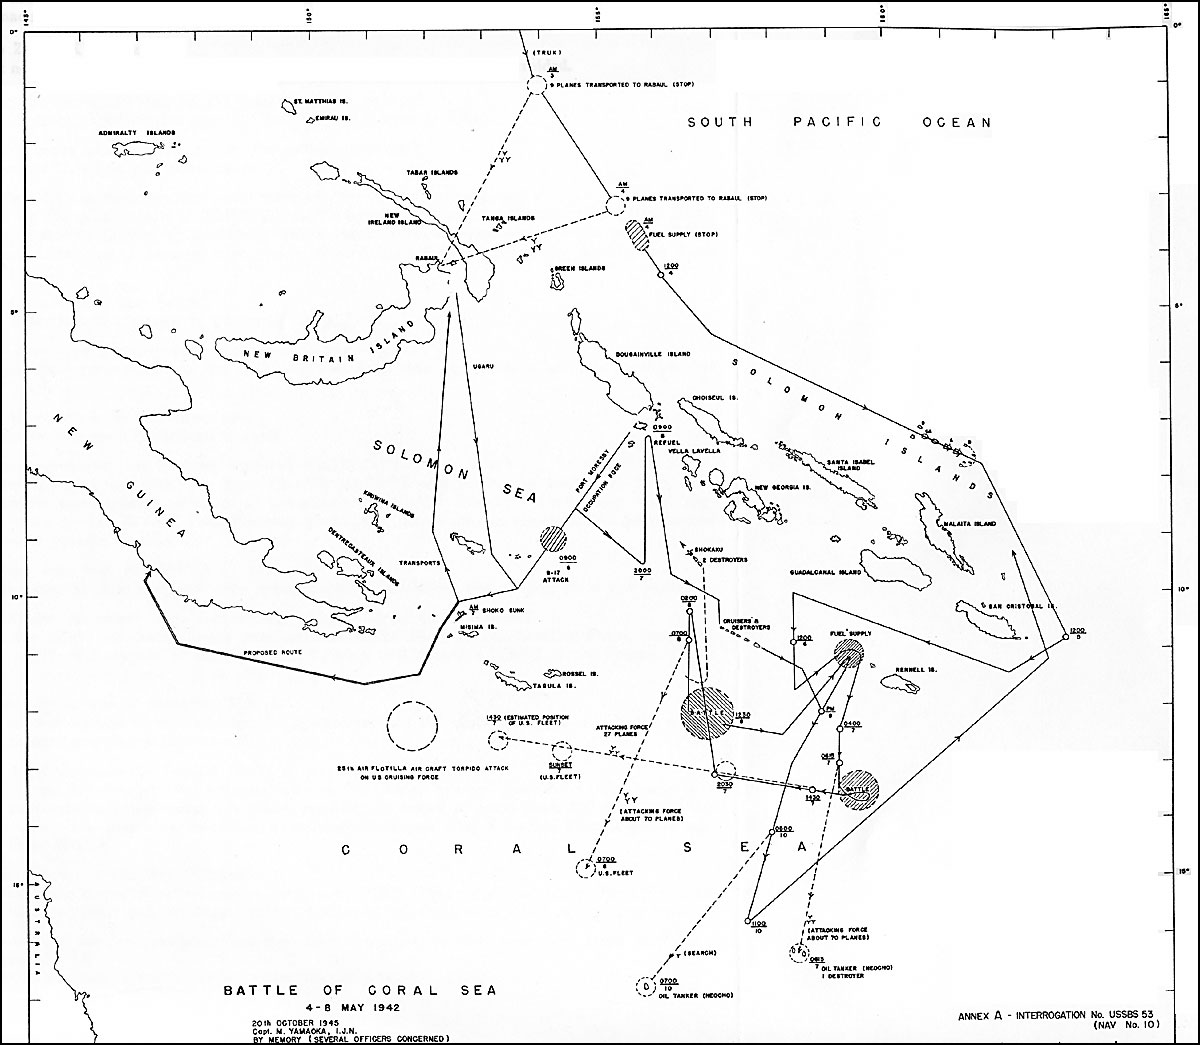 Map of Battle of Coral Sea, part of Captain Mineo Yamaoka's interrogation, 19 Oct 1945